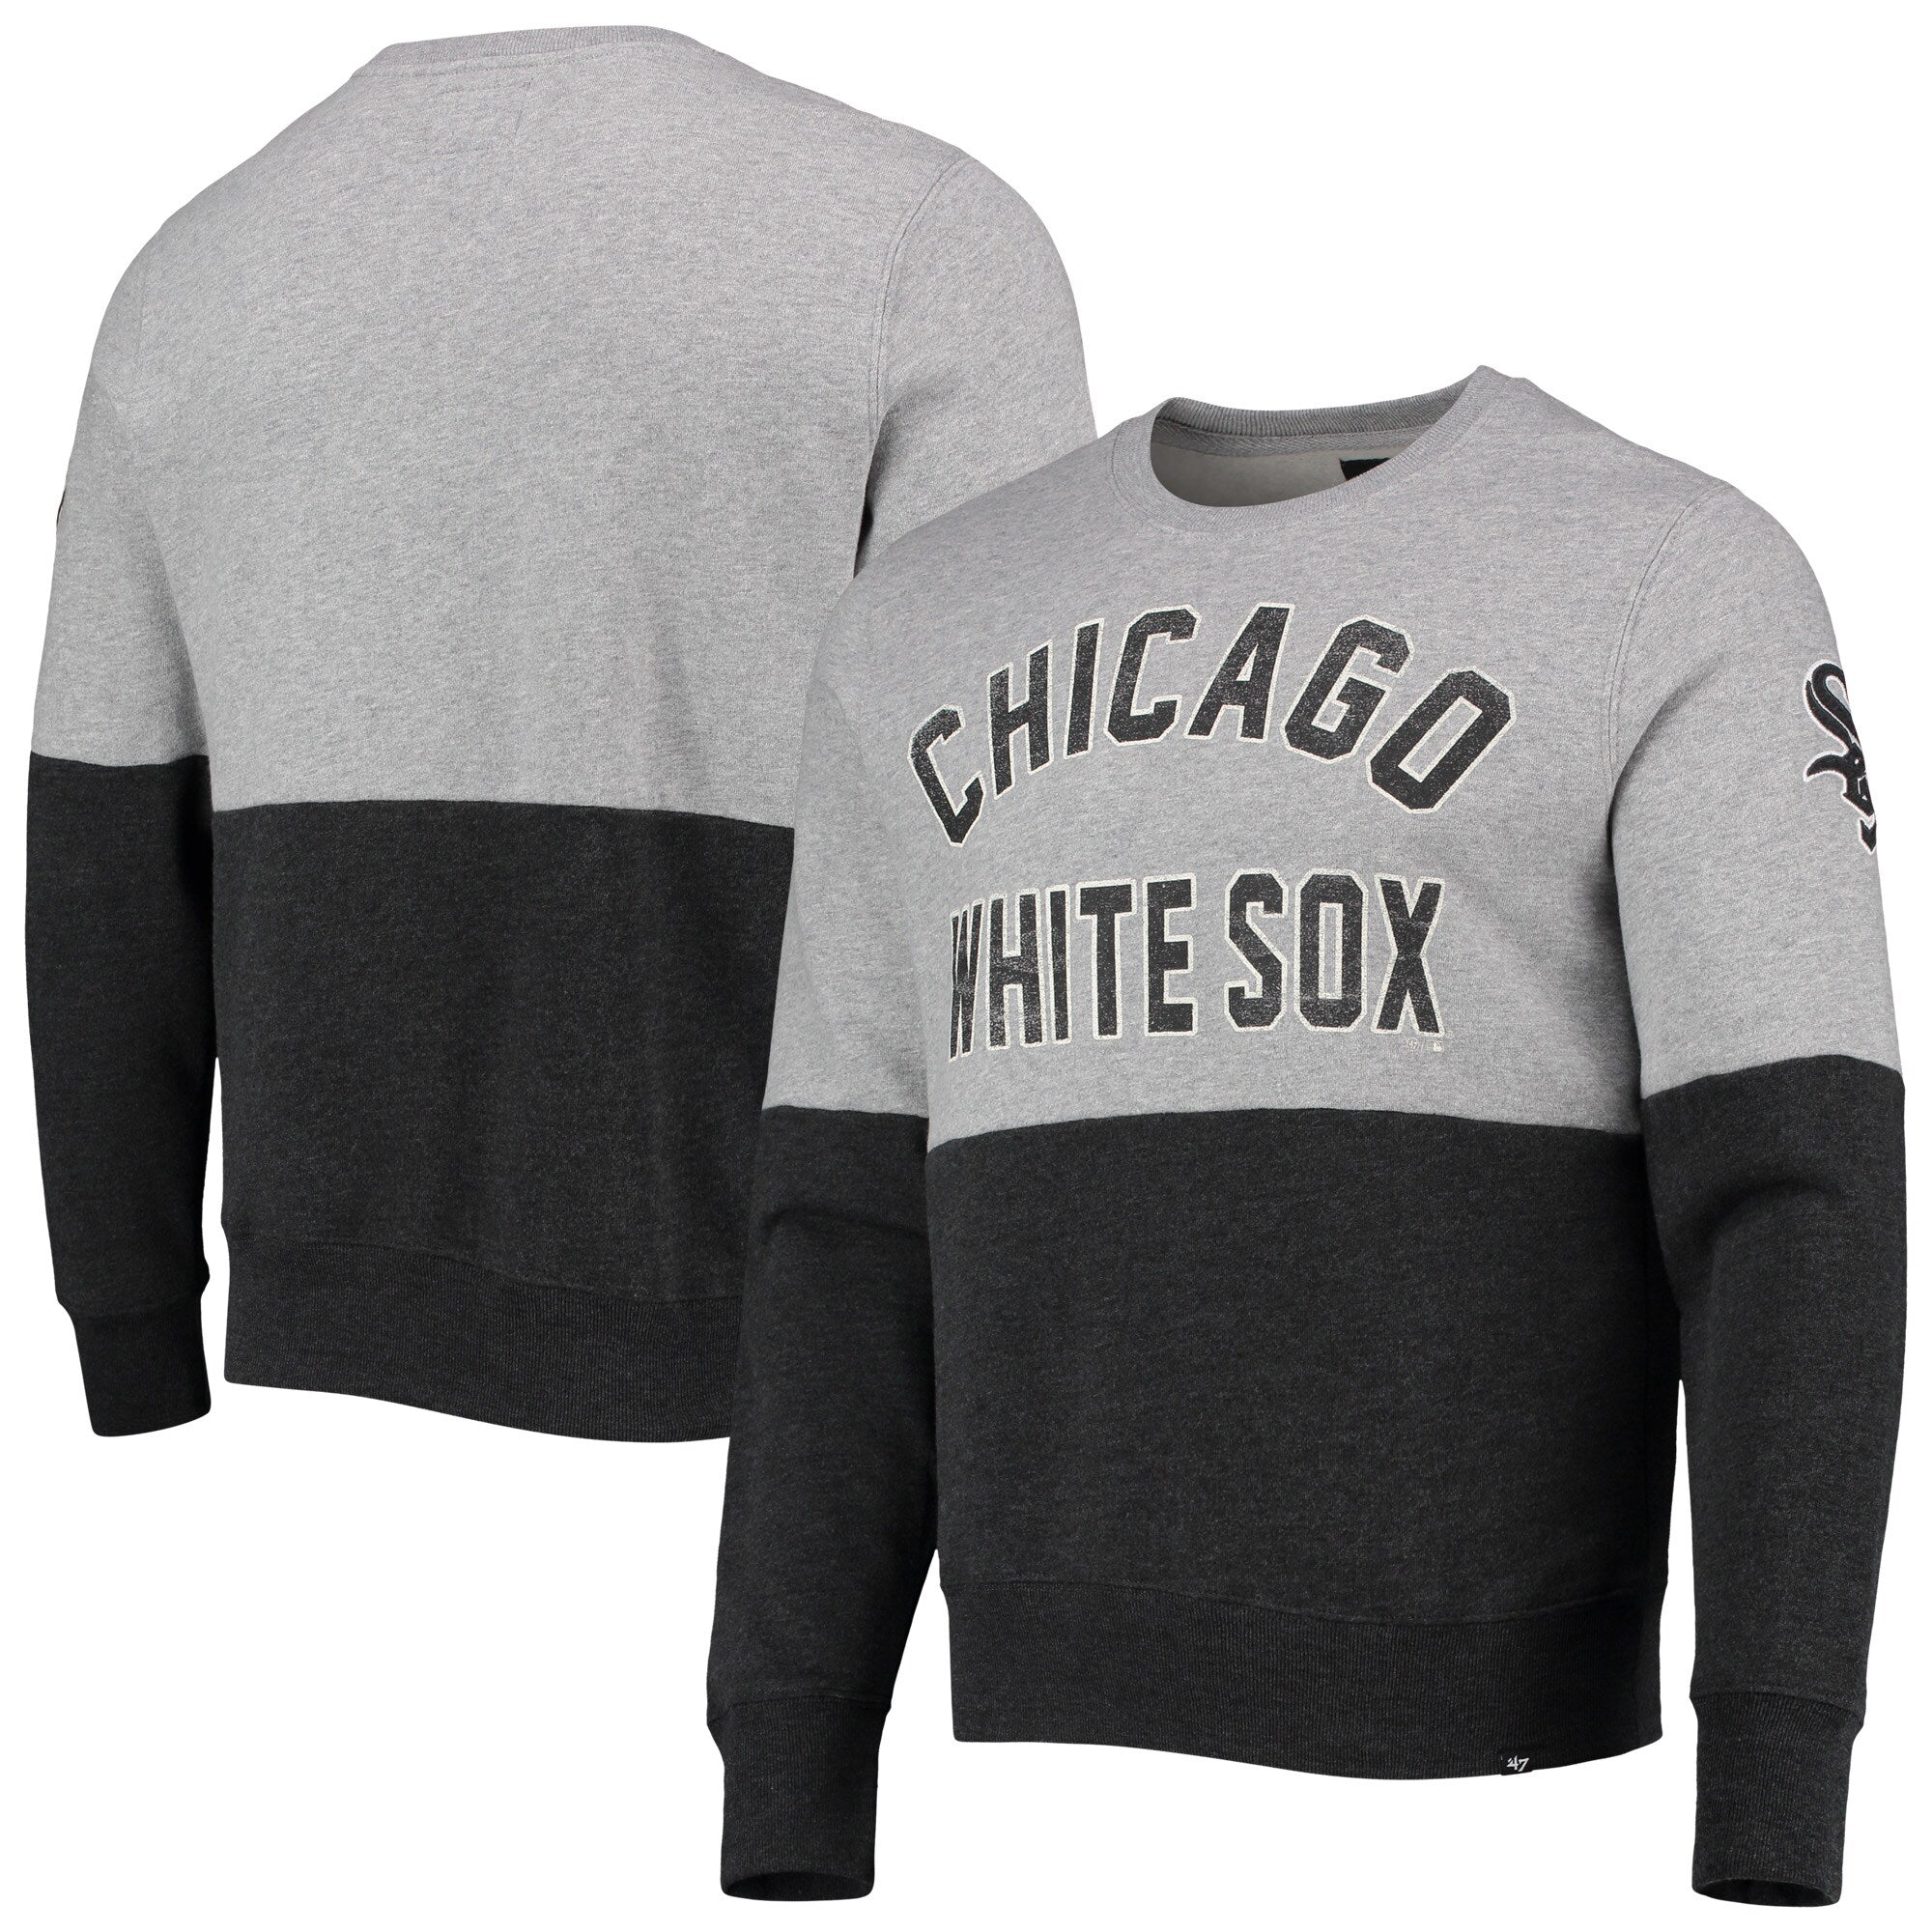 White Sox southside shirt, hoodie, sweater, longsleeve and V-neck T-shirt